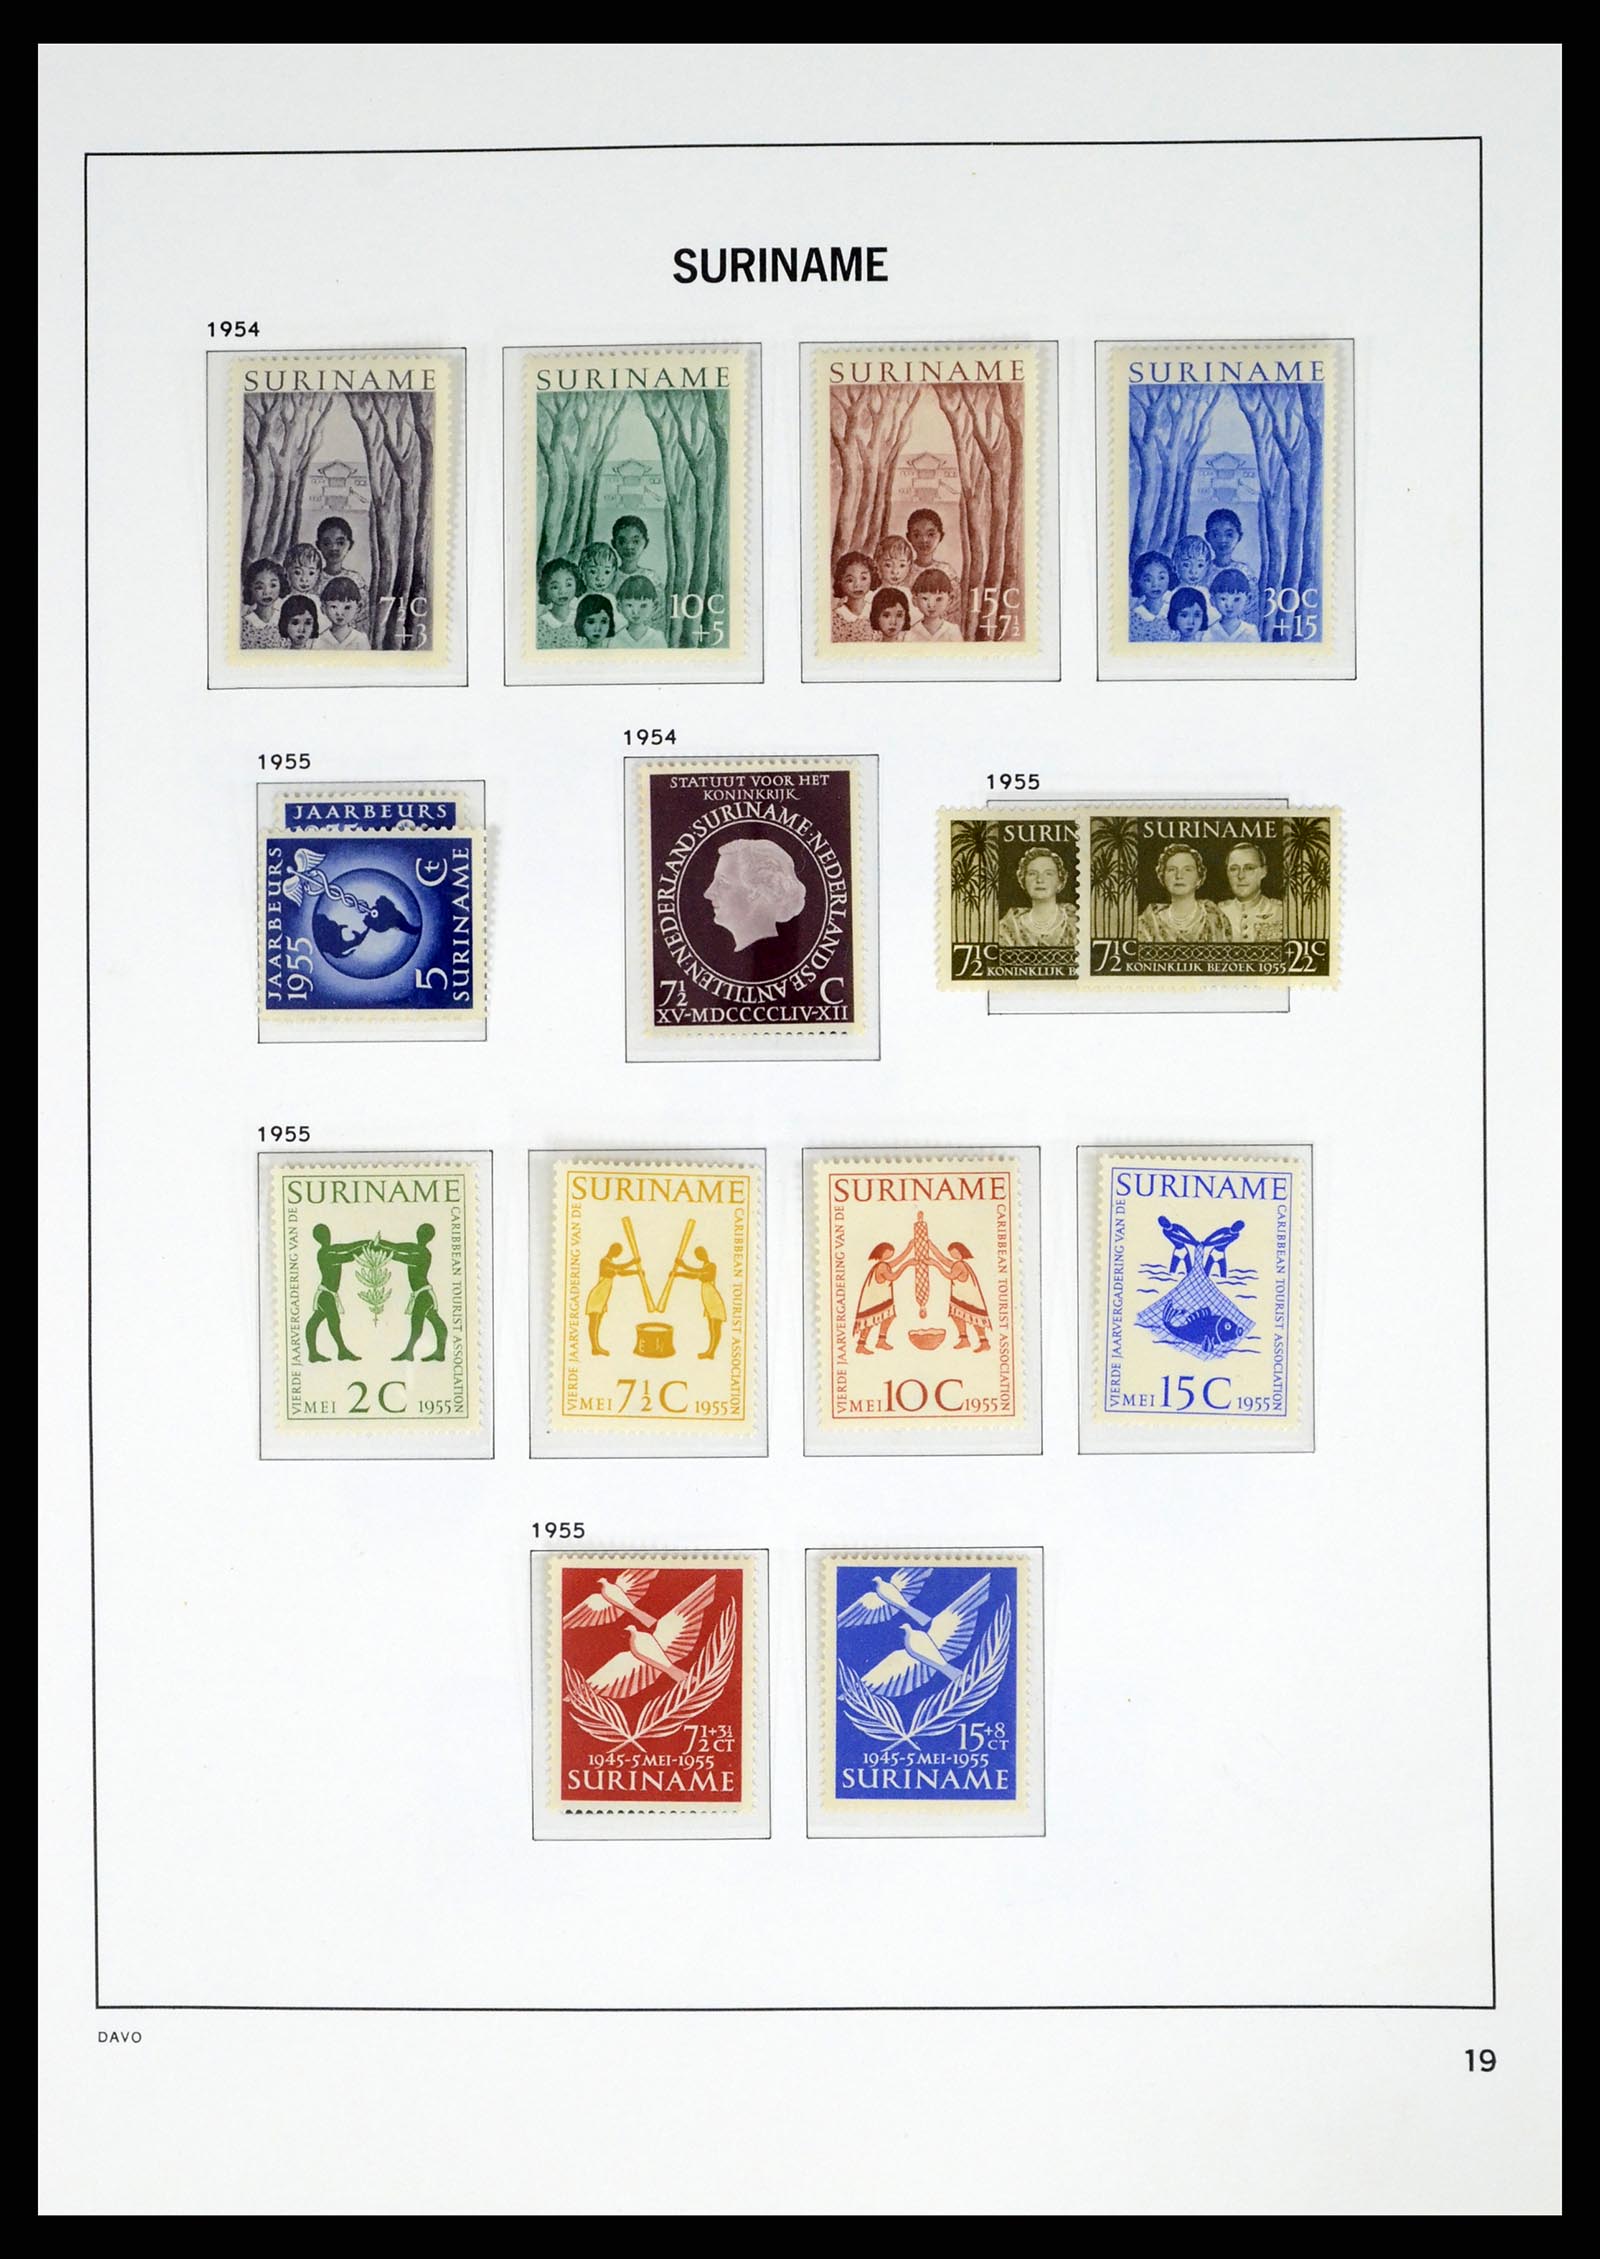 37421 019 - Stamp collection 37421 Suriname 1873-1975.